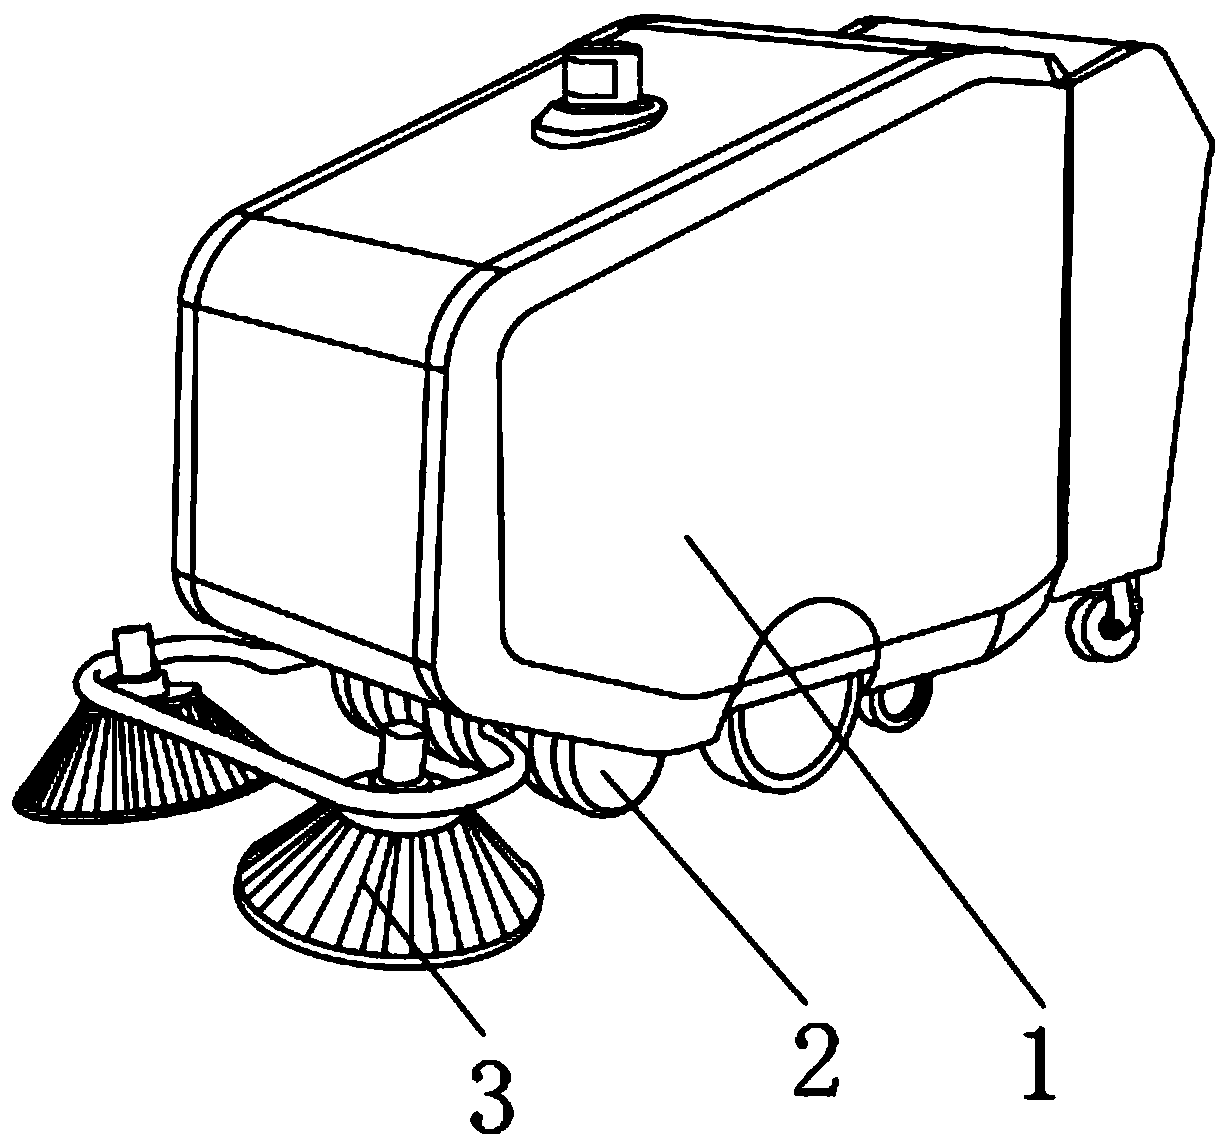 Ground sweeping device for cleaning robot